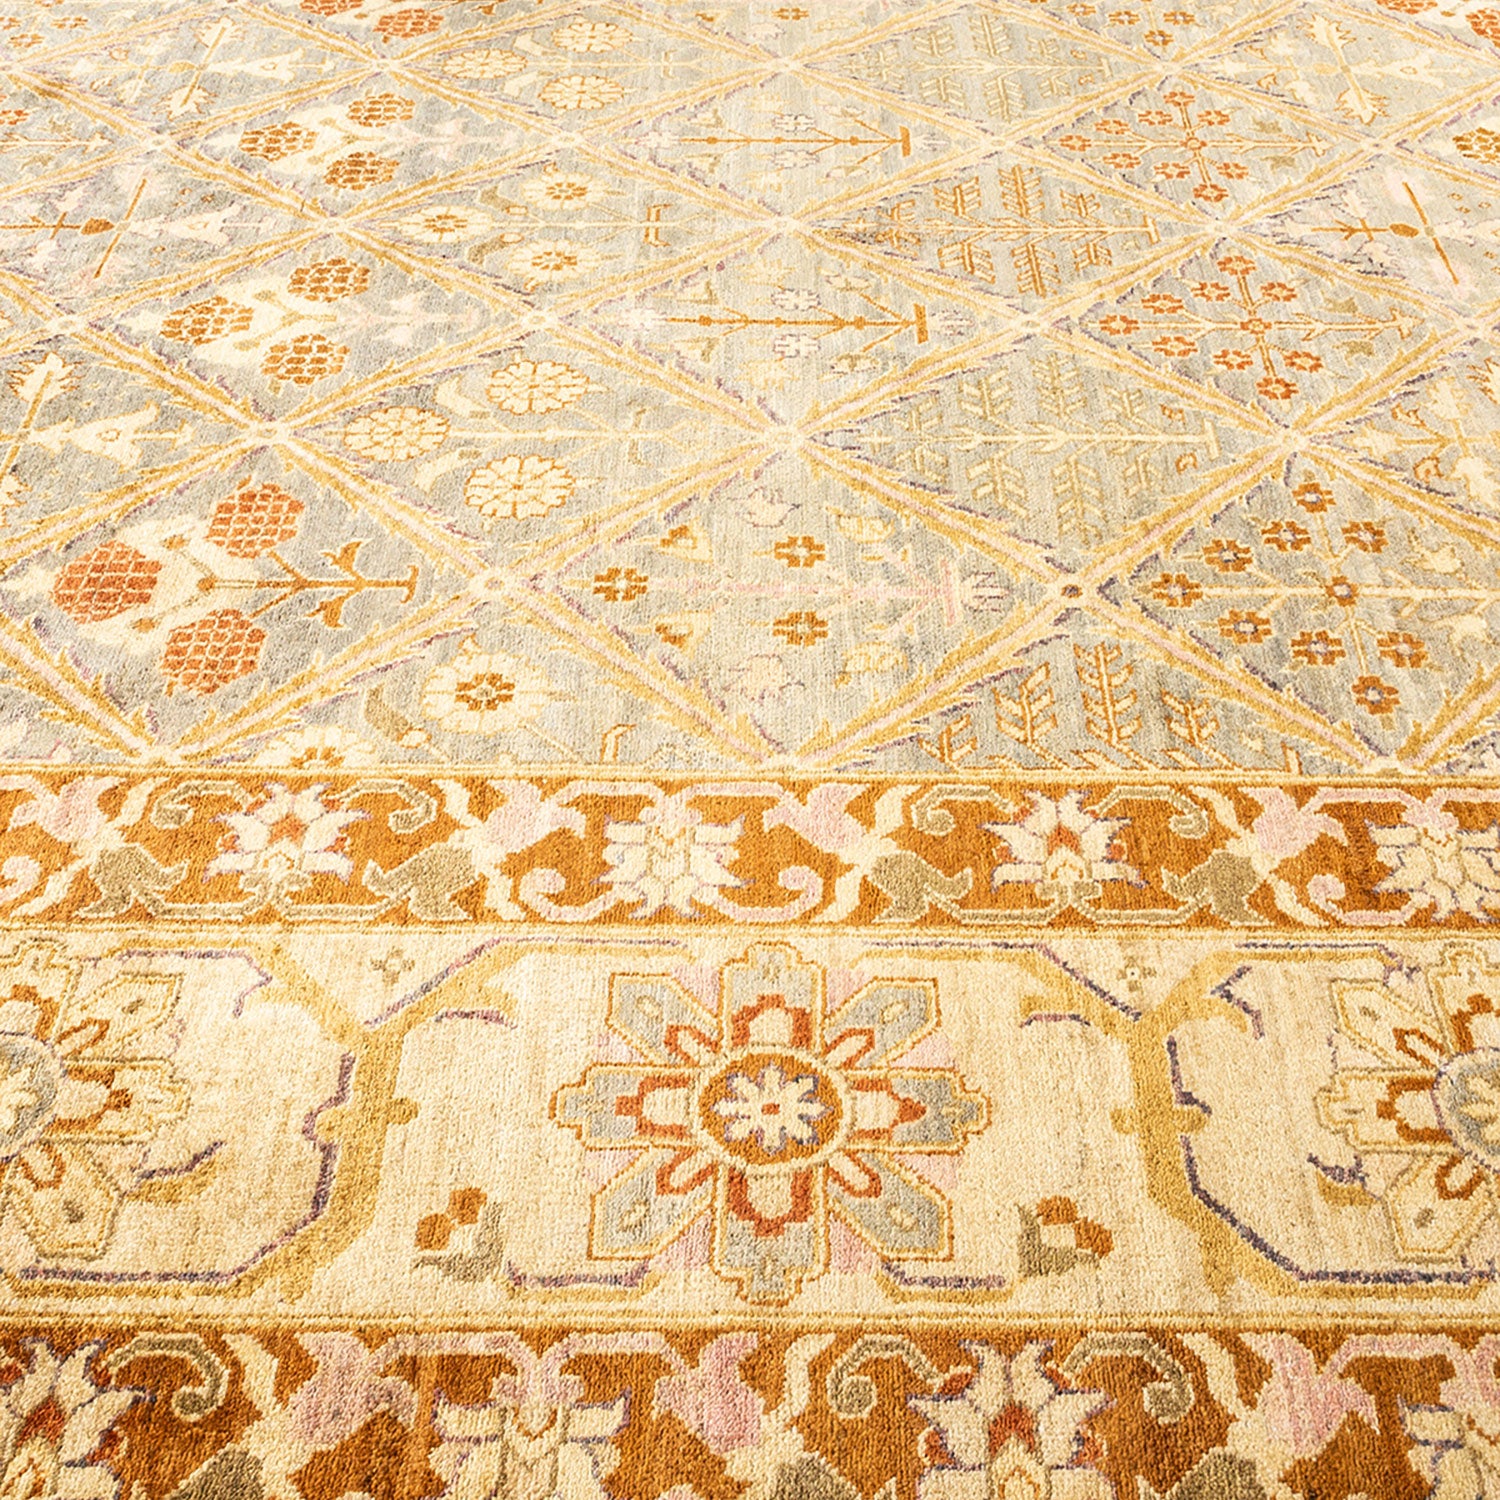 Close-up of an ornate, symmetrical carpet with intricate floral motifs.